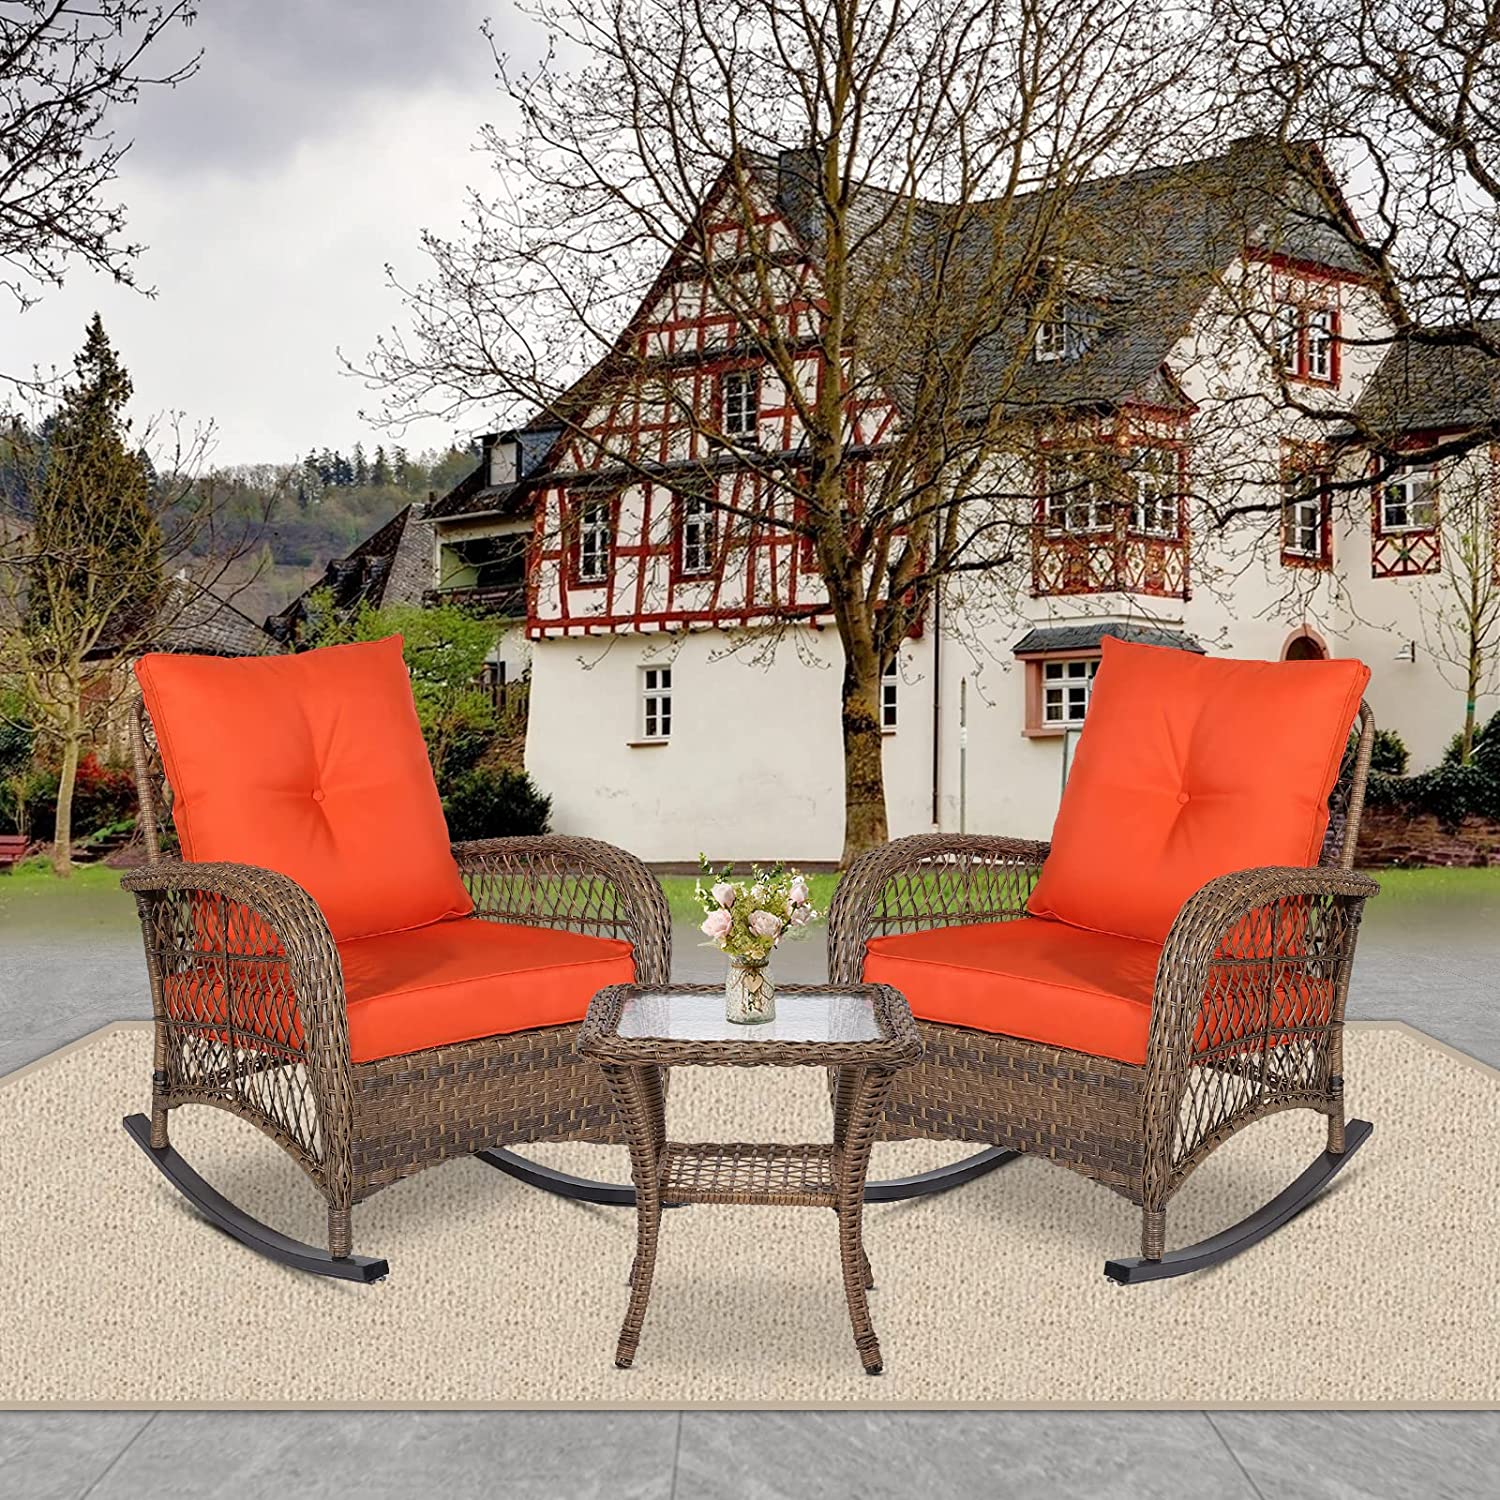 SOCIALCOMFY 3-Piece Outdoor Wicker Rocking Chair Set, Patio Bistro Conversation Sets with Cushions and Glass-Top Coffee Table, Rattan Furniture Sets for Porch & Backyard, Orange - image 1 of 7